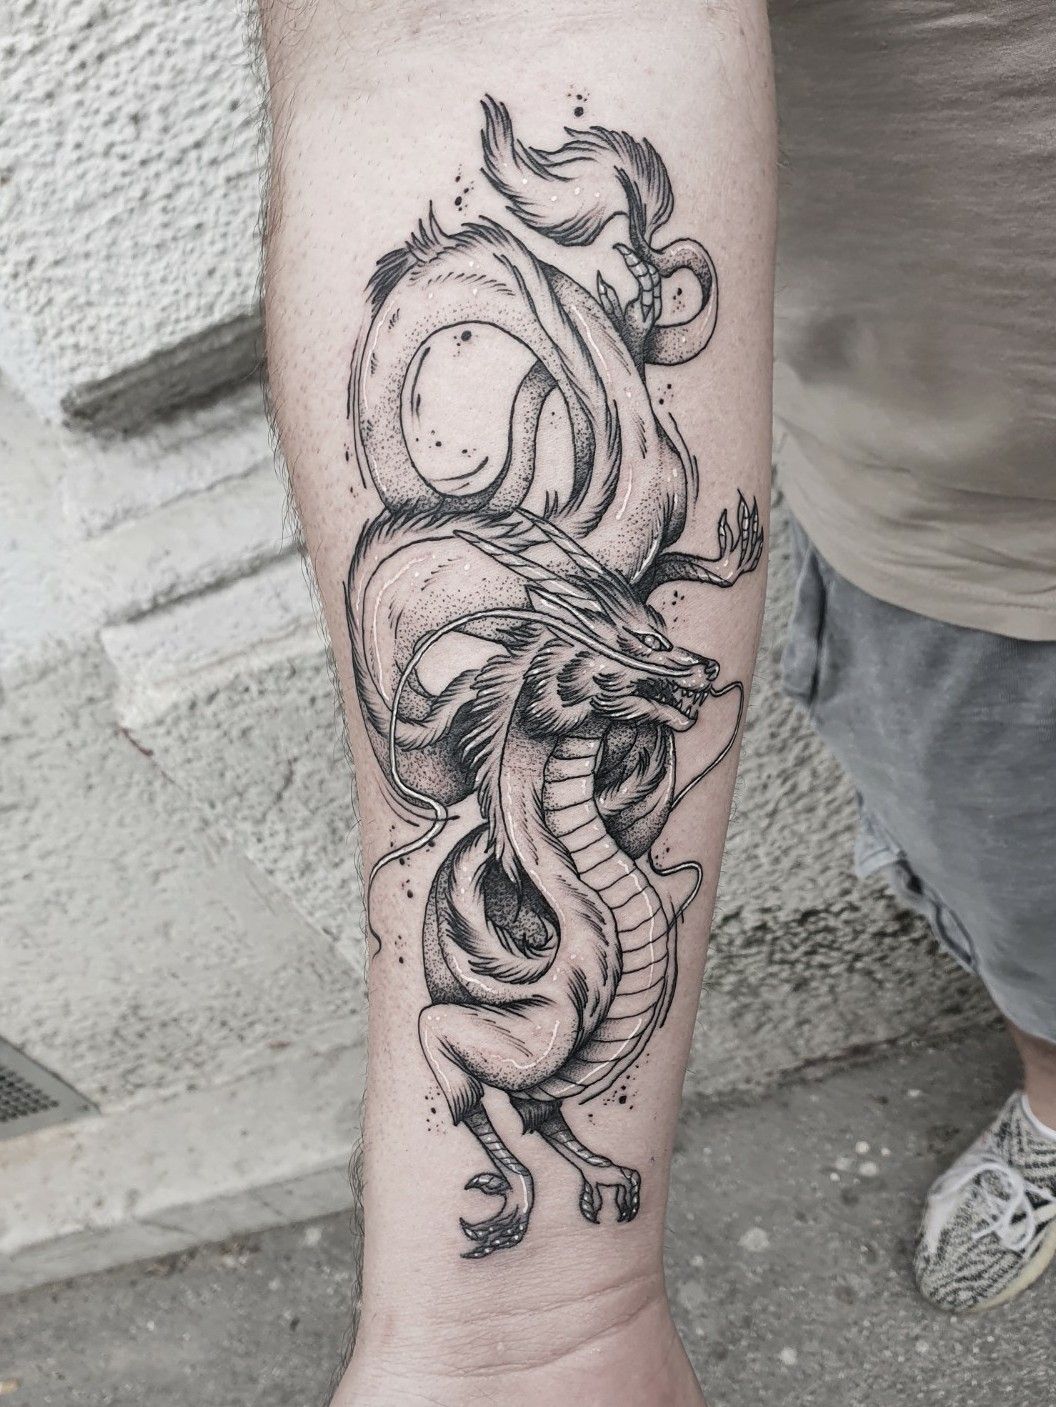 Tattoo uploaded by Victor Chateaubriand  I think Ill call this one  Horace the Hungarian Horntail  Thanks bro rodrigocanteras Done at  lovehatenewyork rodrigocanteras tattoosbyrodrigocanteras nyink  donedhardy dragon traditional 